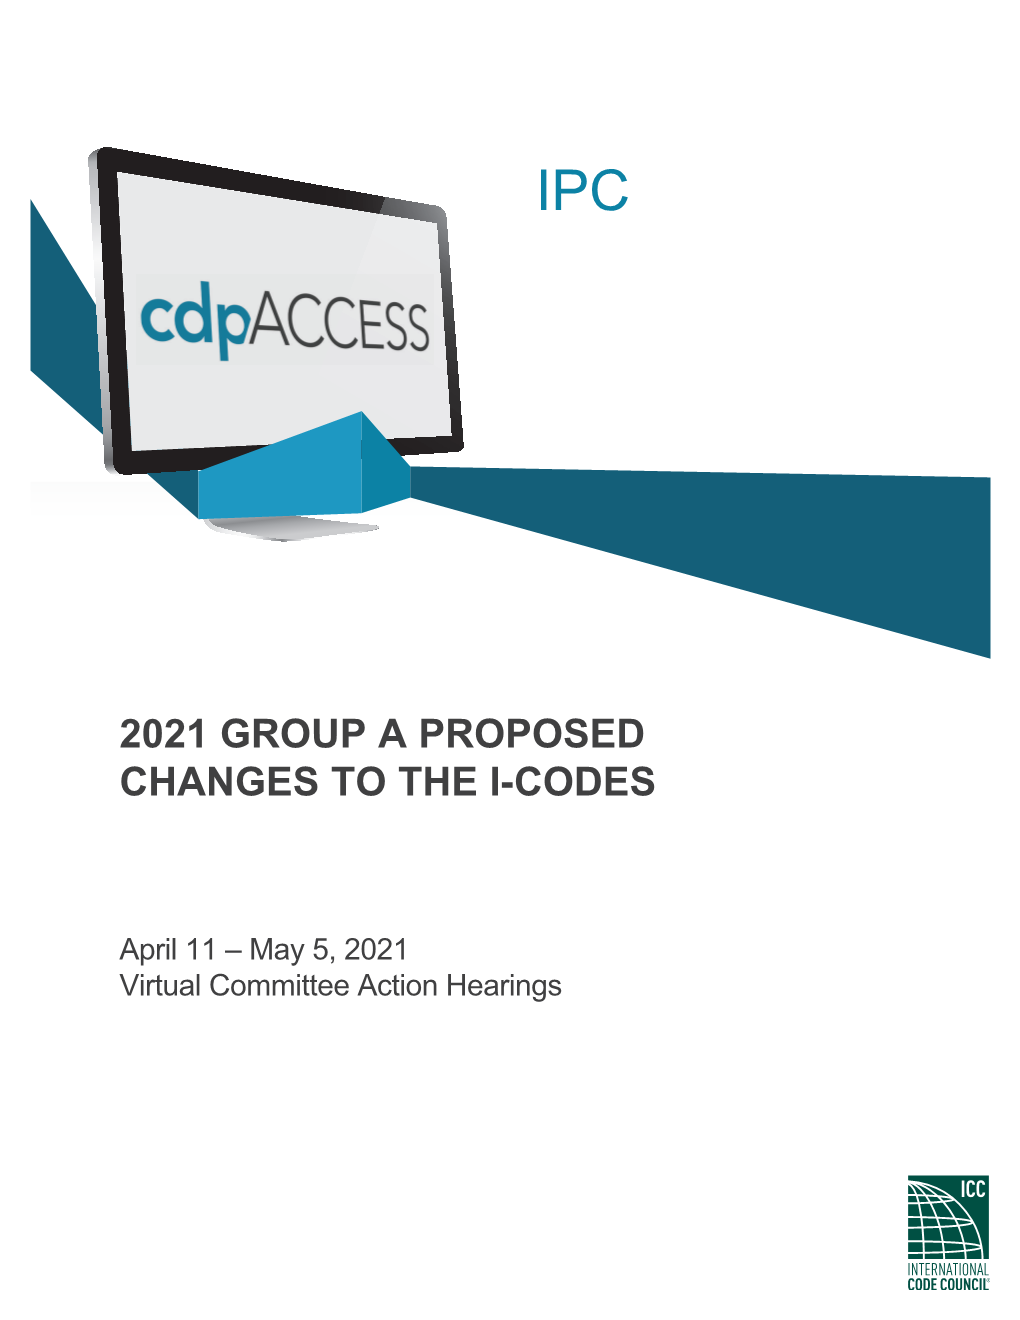 2021 Group a Proposed Changes to the I-Codes